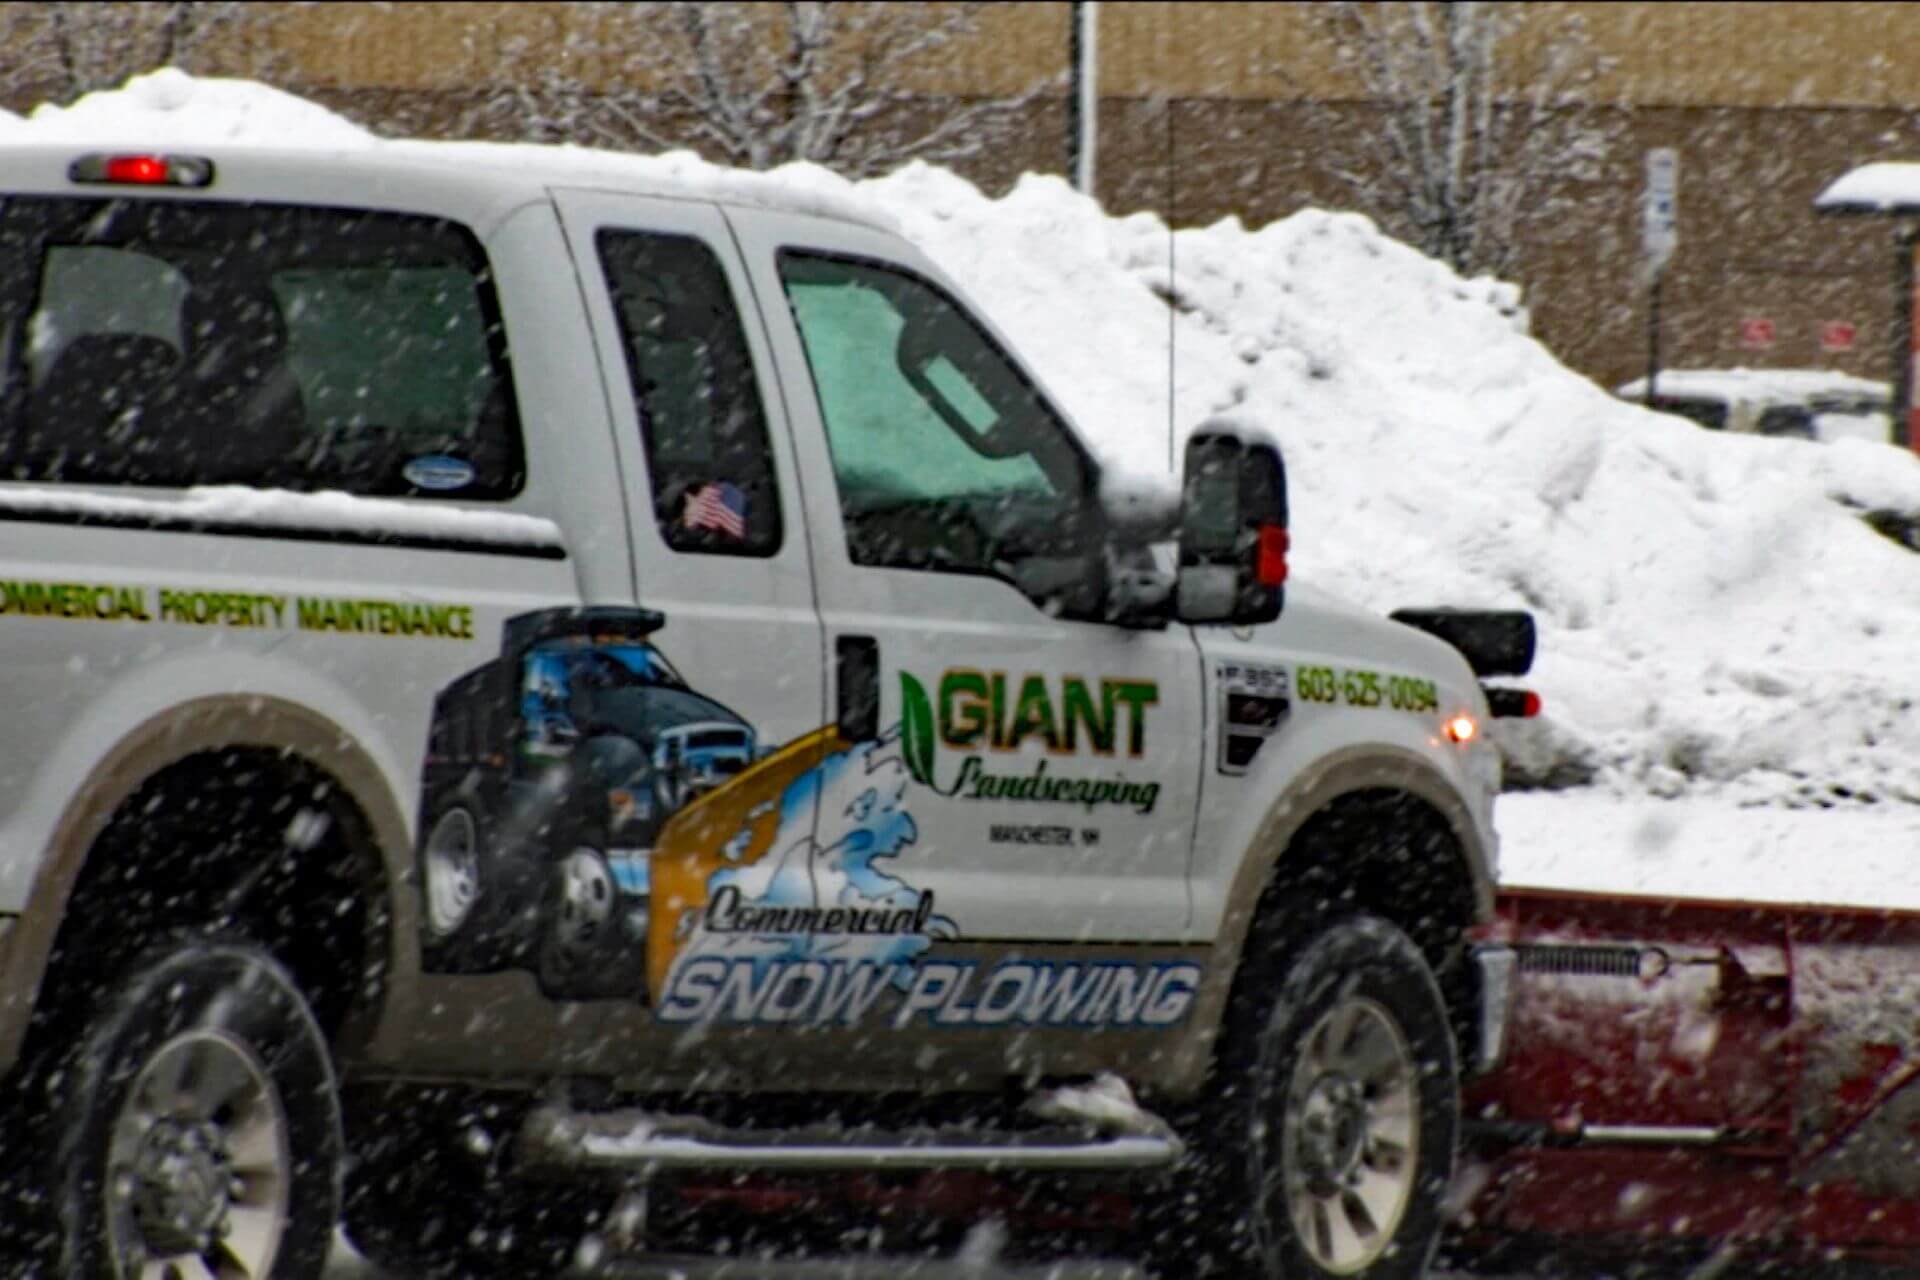 Side view of Giant Landscaping snow plow truck with the words Commercial Property Maintenance and their logo